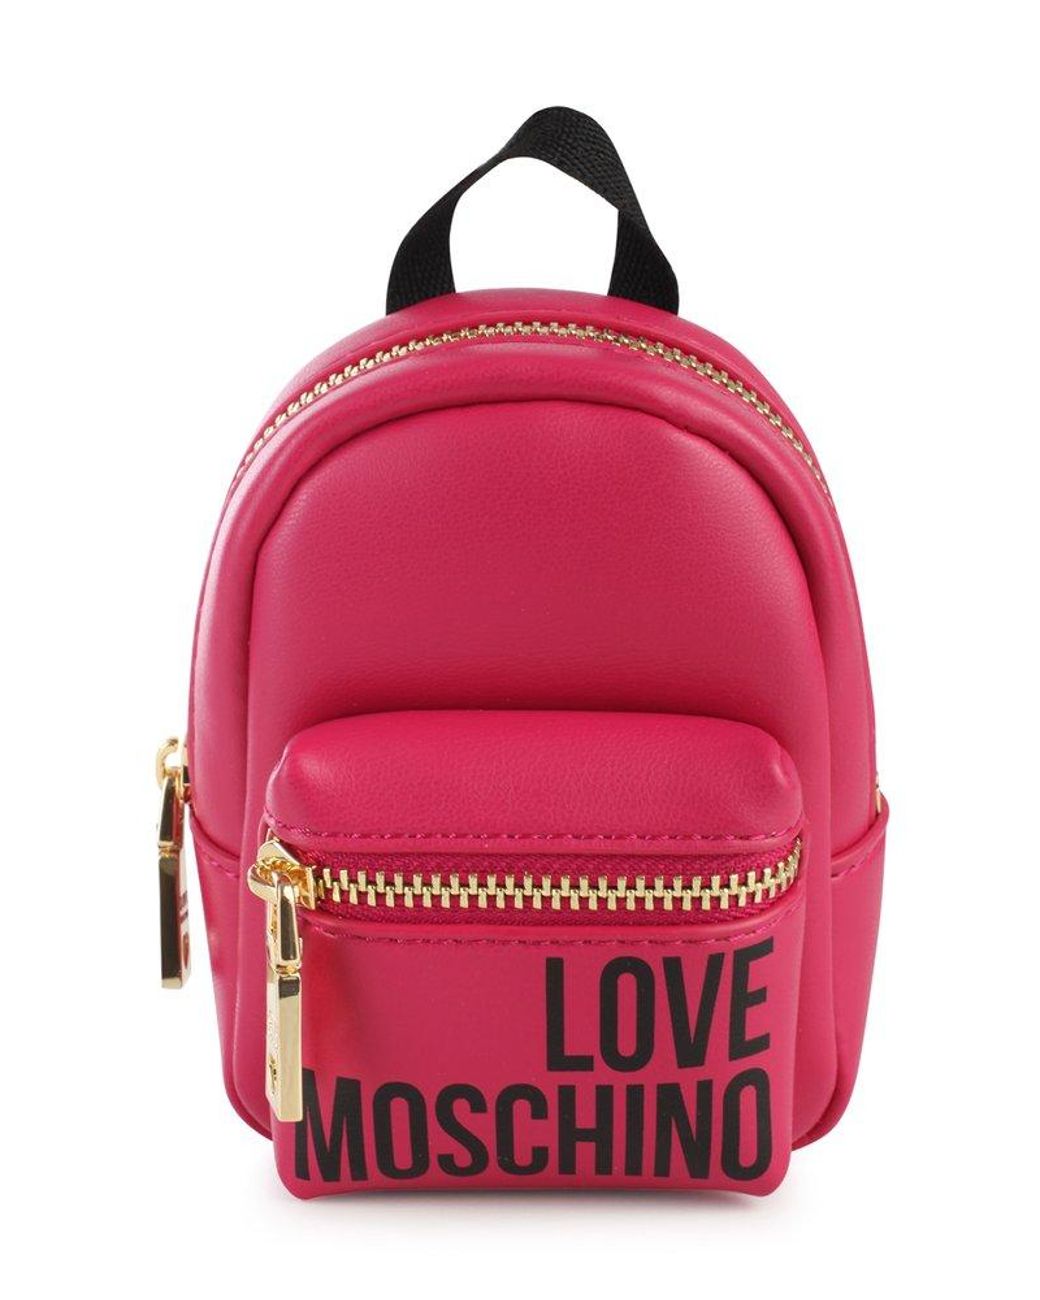 Love Moschino Complementi Pelletteria Leather Goods Complements in Pink |  Lyst